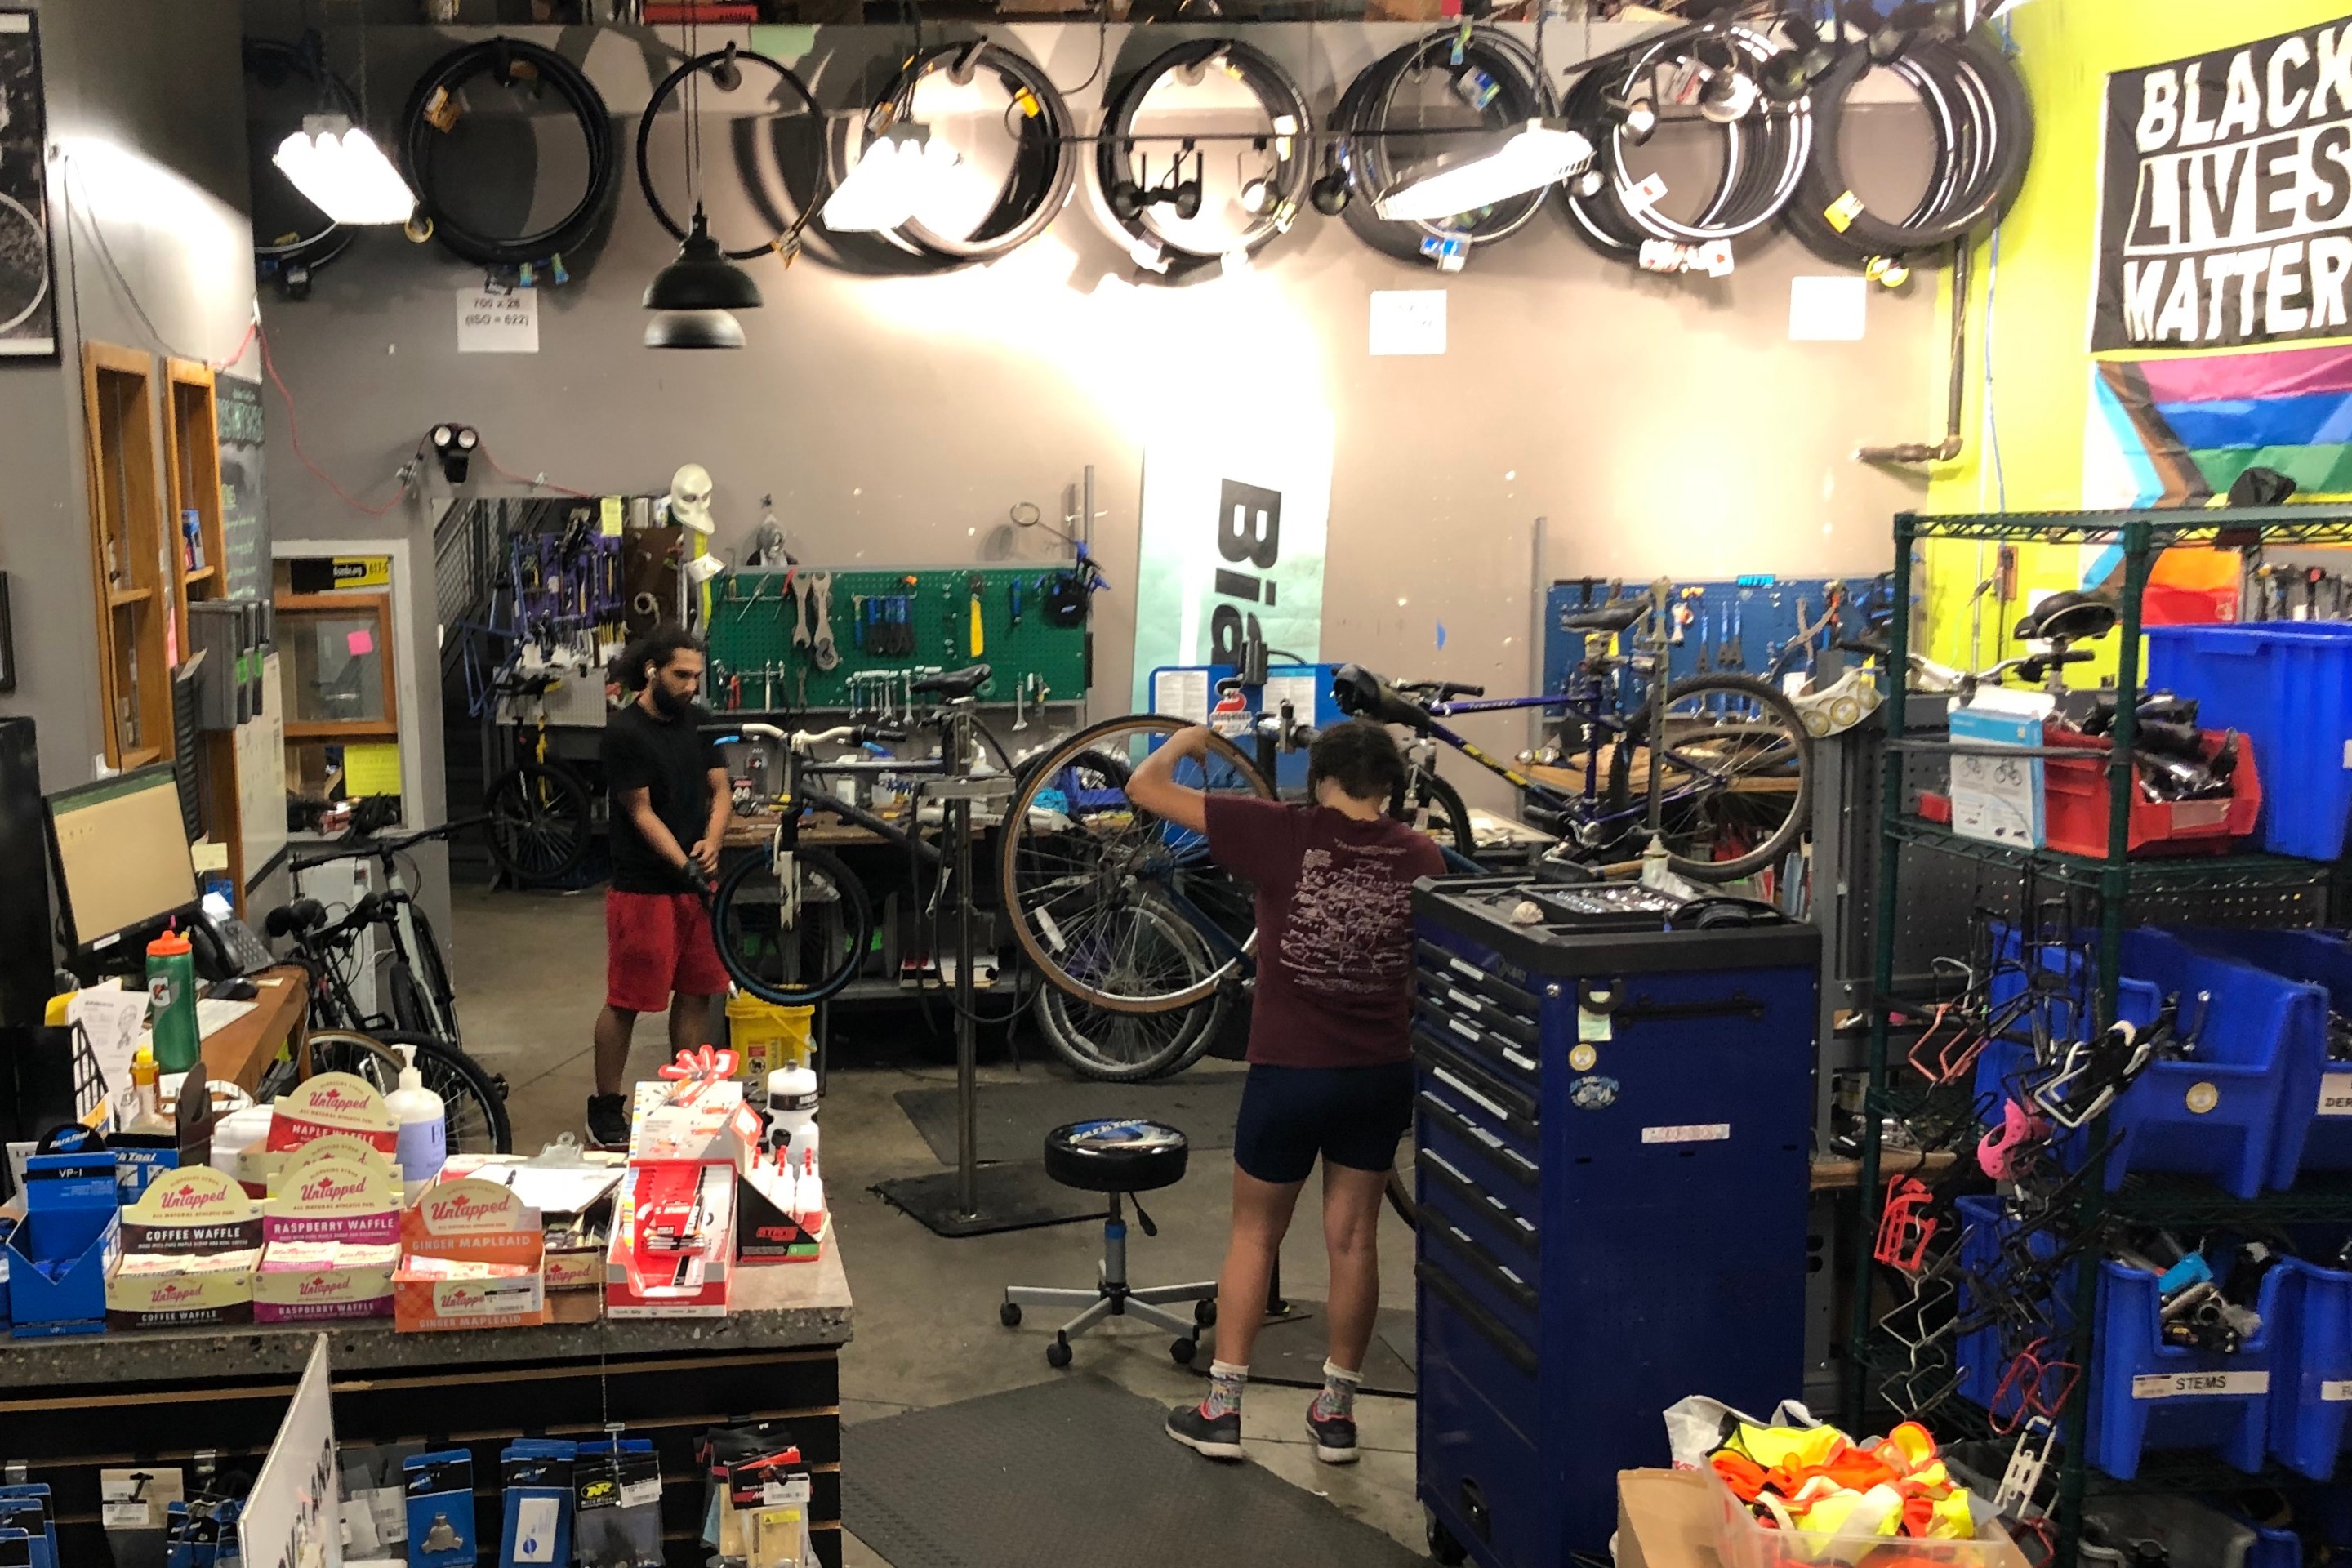 Two mechanics workon bikes on stands in a crowded workshop with bike tires hanging from the high ceilings.